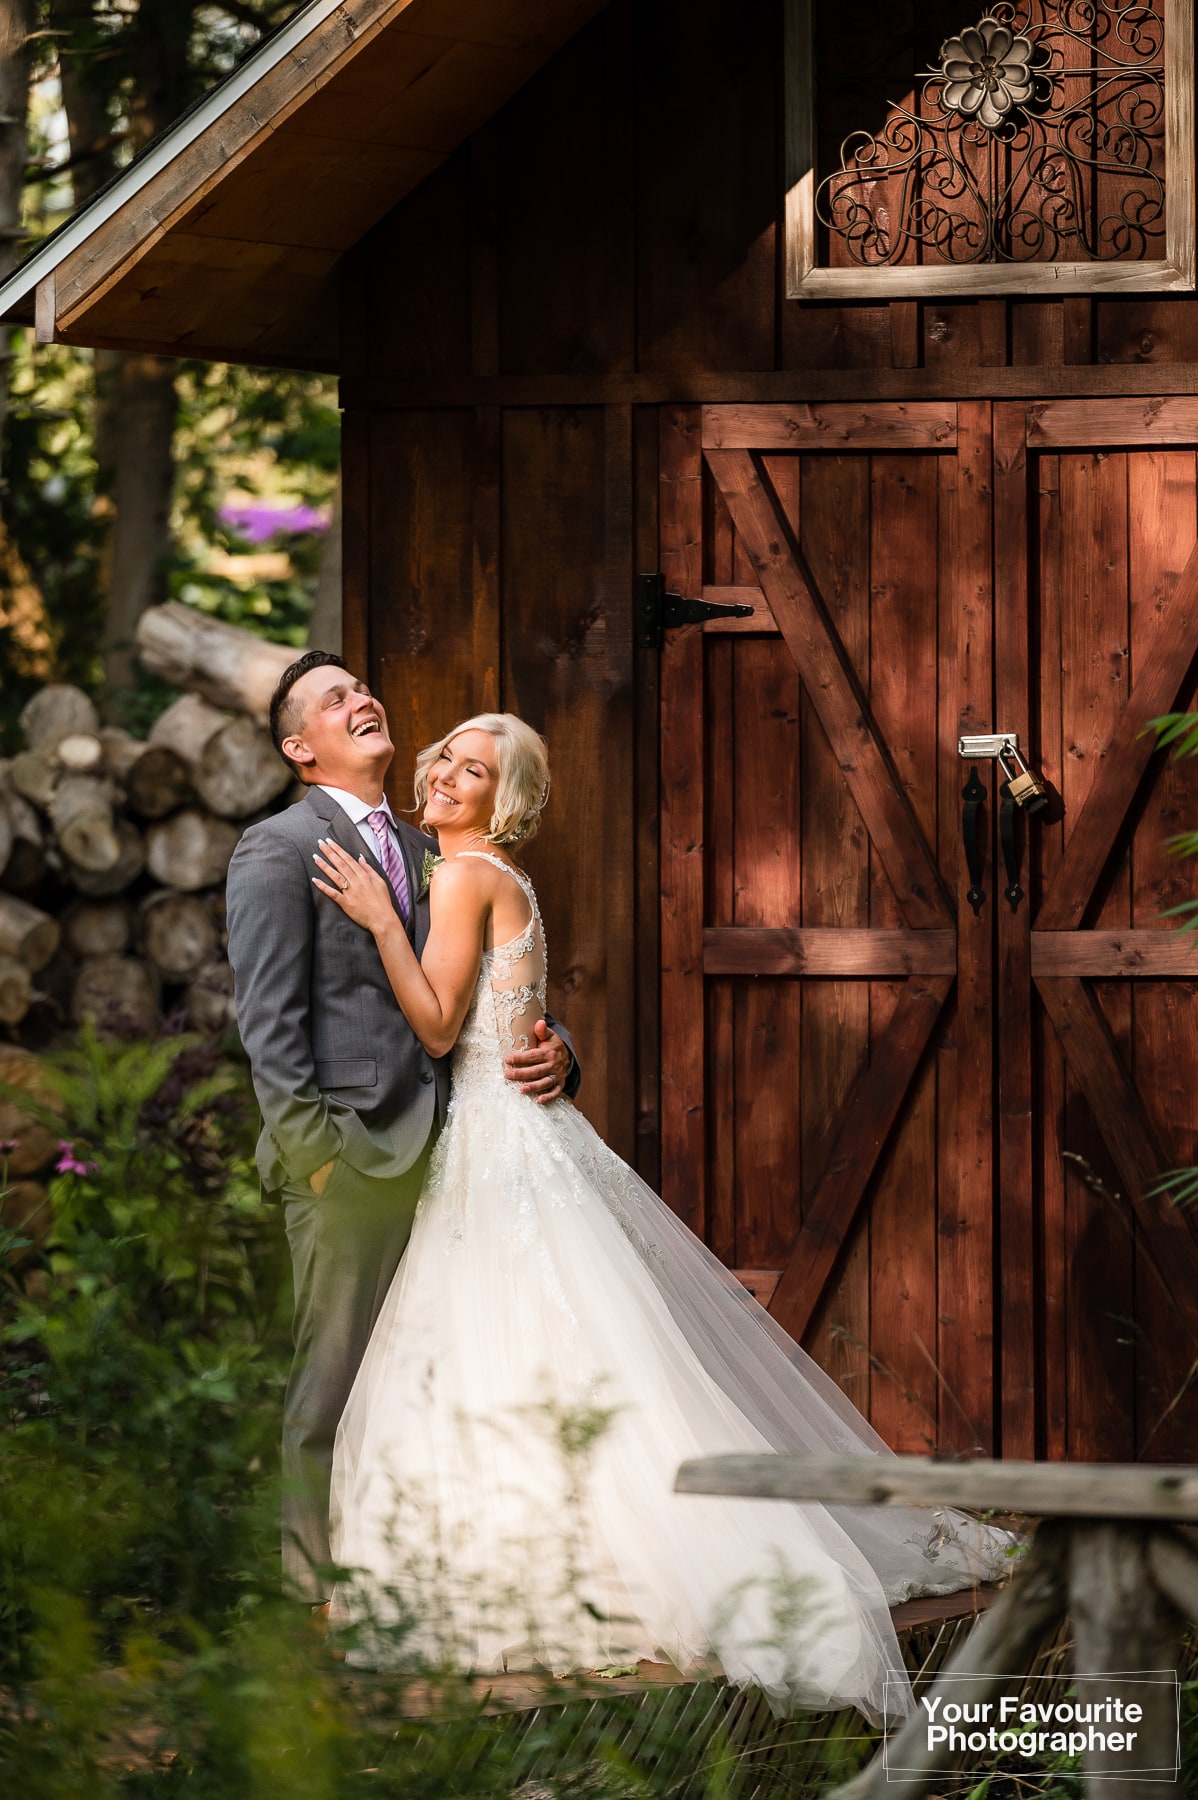 Candid laughing photo of bride and groom at rustic location